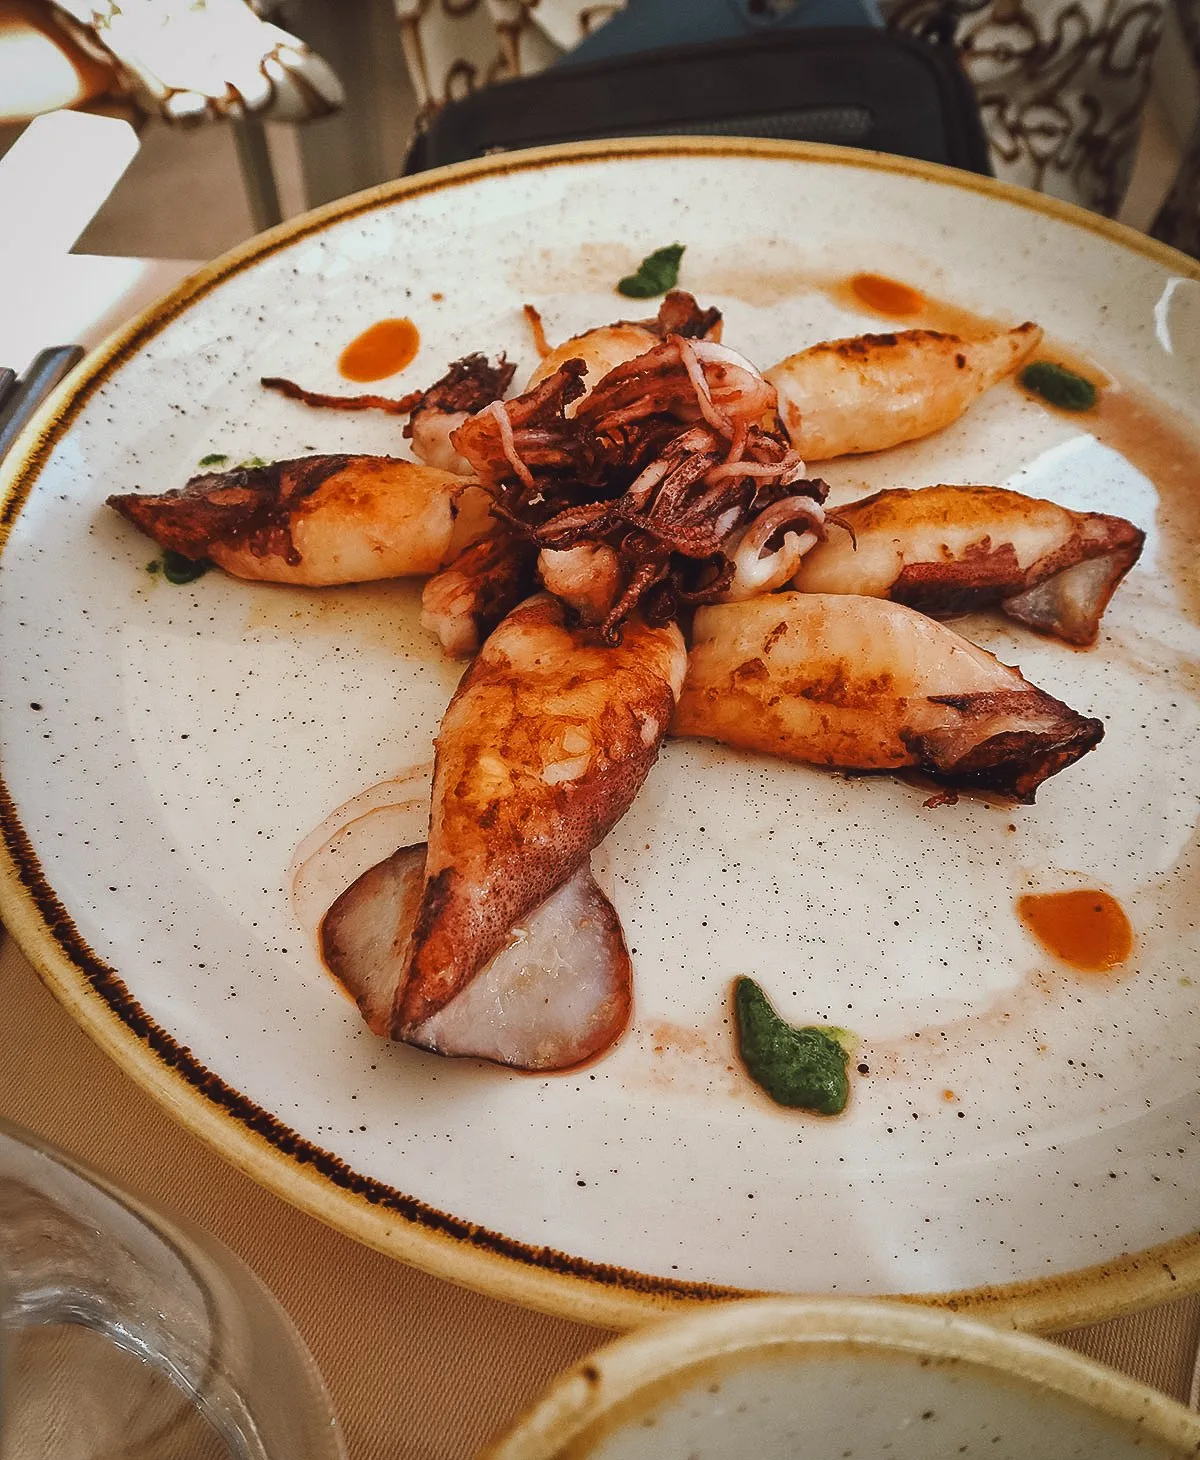 Grilled Ardiatic squid at a restaurant in Dubrovnik